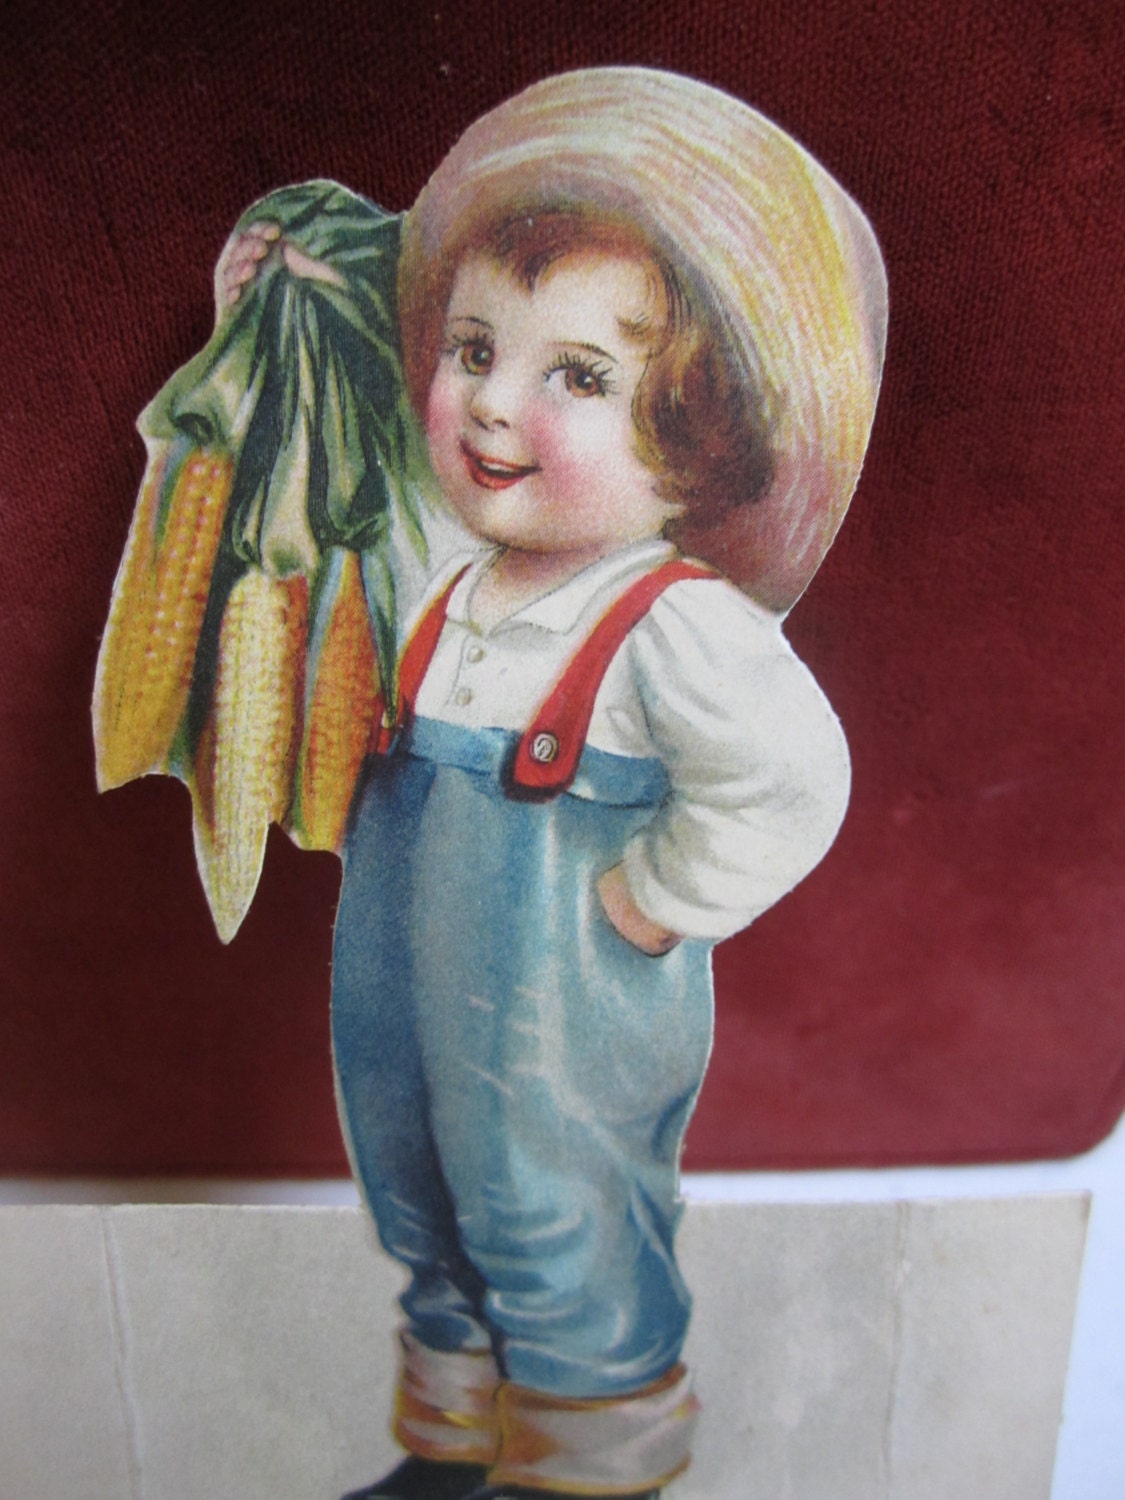 Adorable 1910's-20's die cut thanksgiving place card unused little boy dressed in cuffed jeans straw hat suspenders holding  corn on the cob - puffadonna